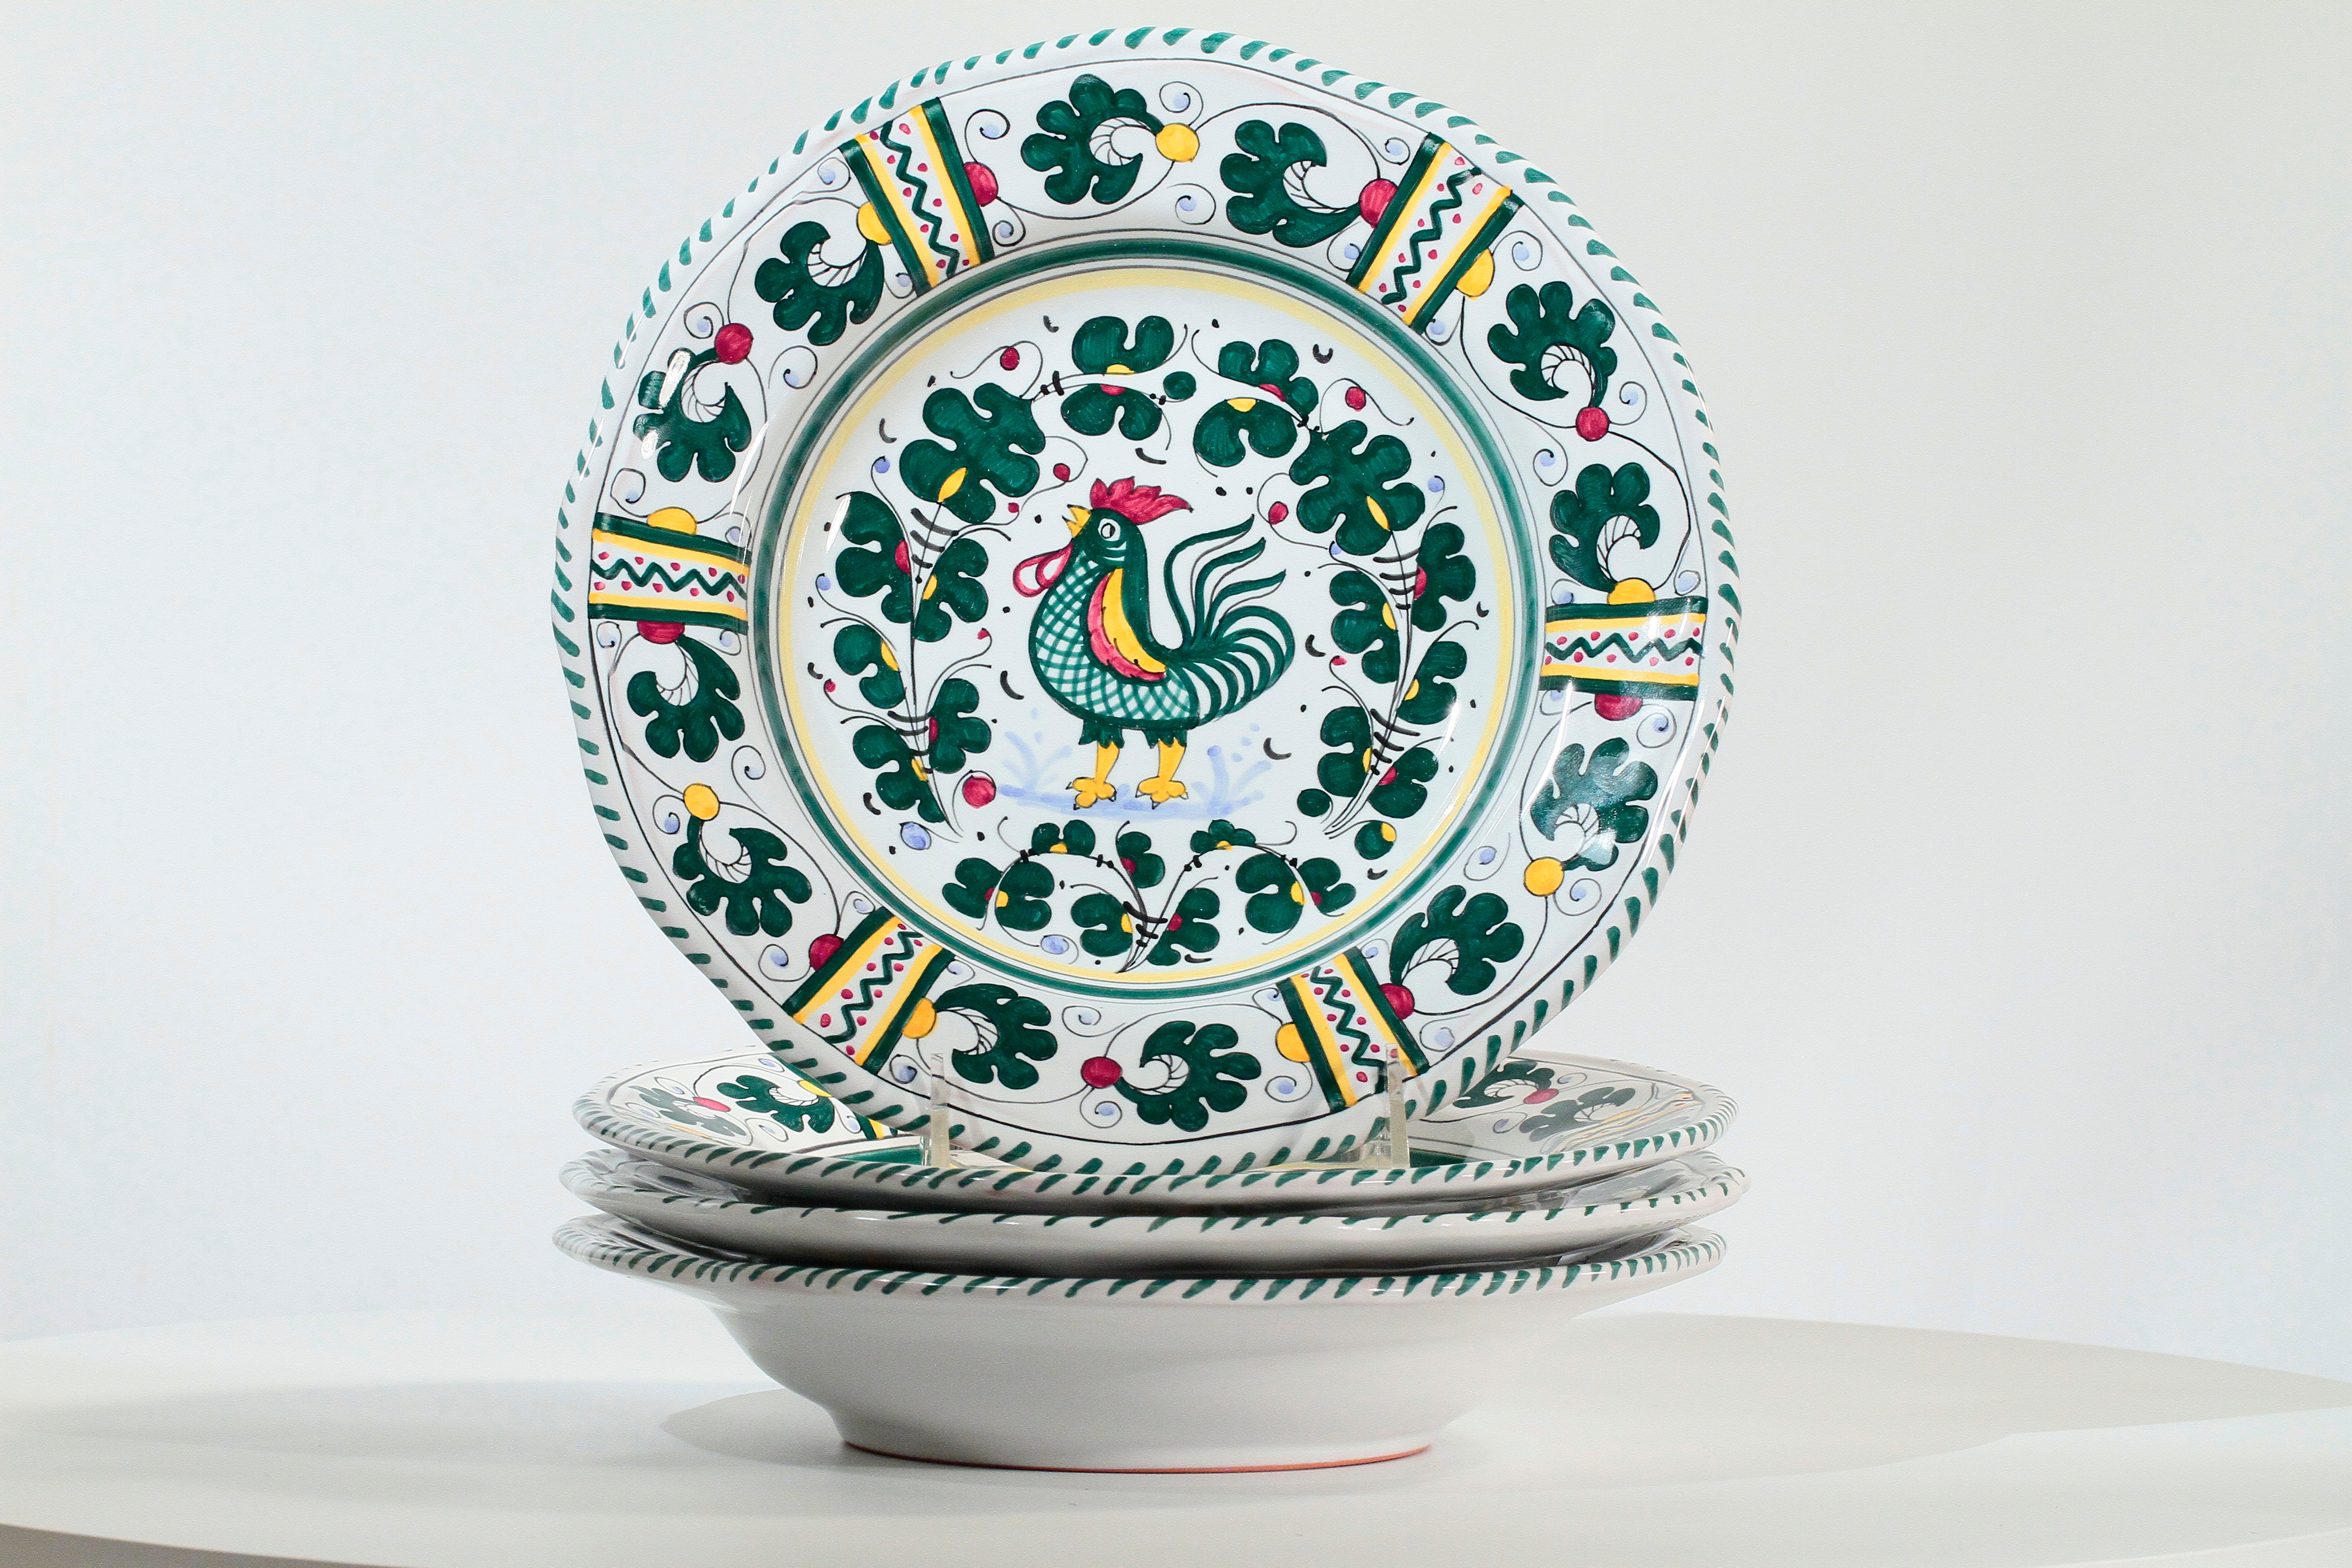 Orvieto Pasta/Soup Bowl, Full Design - Set of 4, ceramics, pottery, italian design, majolica, handmade, handcrafted, handpainted, home decor, kitchen art, home goods, deruta, majolica, Artisan, treasures, traditional art, modern art, gift ideas, style, SF, shop small business, artists, shop online, landmark store, legacy, one of a kind, limited edition, gift guide, gift shop, retail shop, decorations, shopping, italy, home staging, home decorating, home interiors